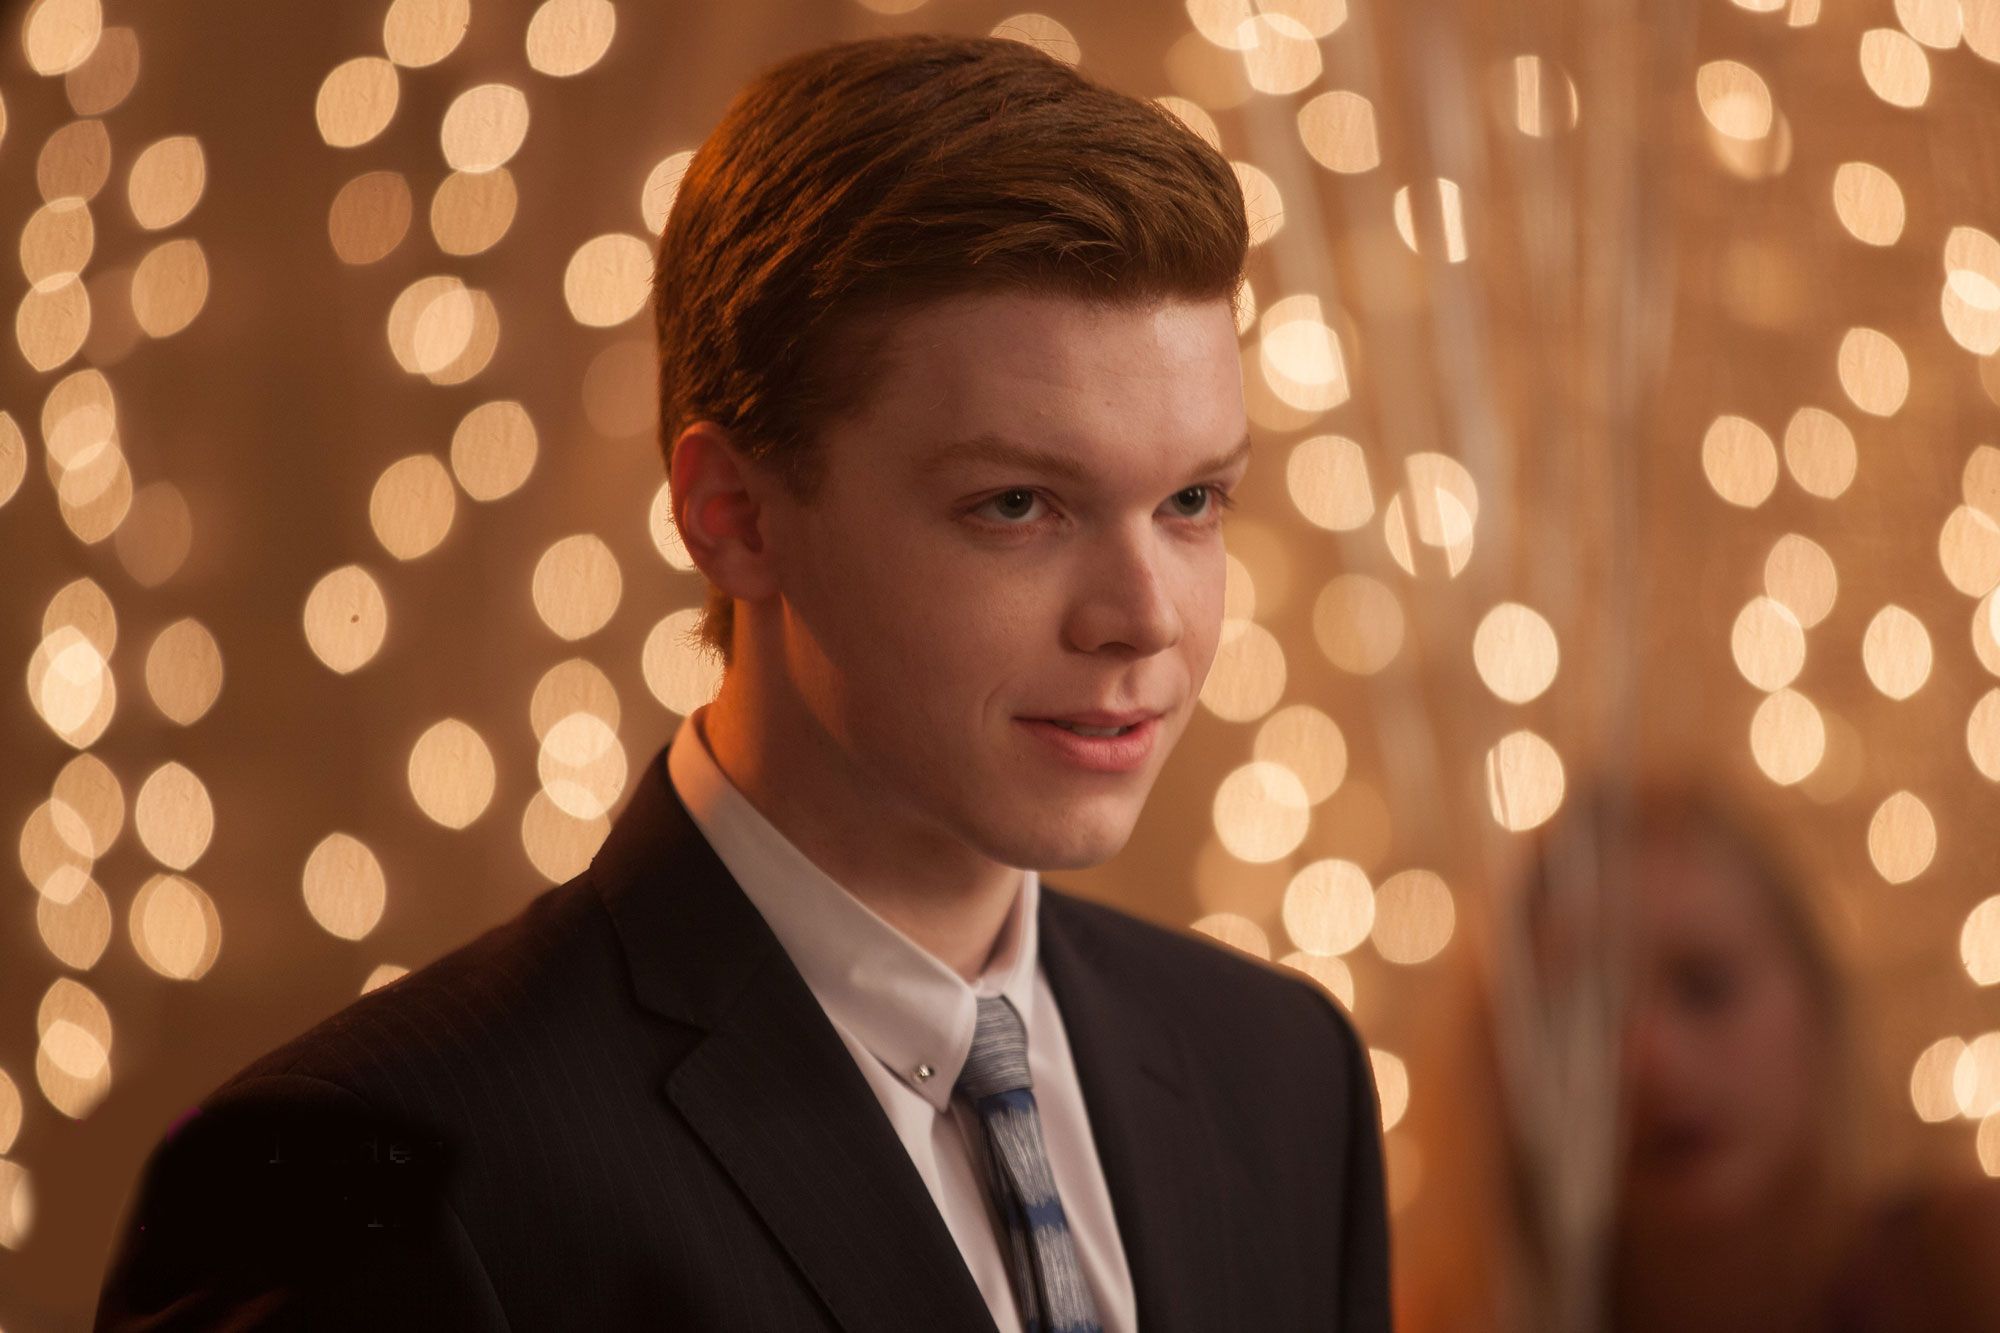 From Joker to Superboy, Cameron Monaghan joins DC's Reign